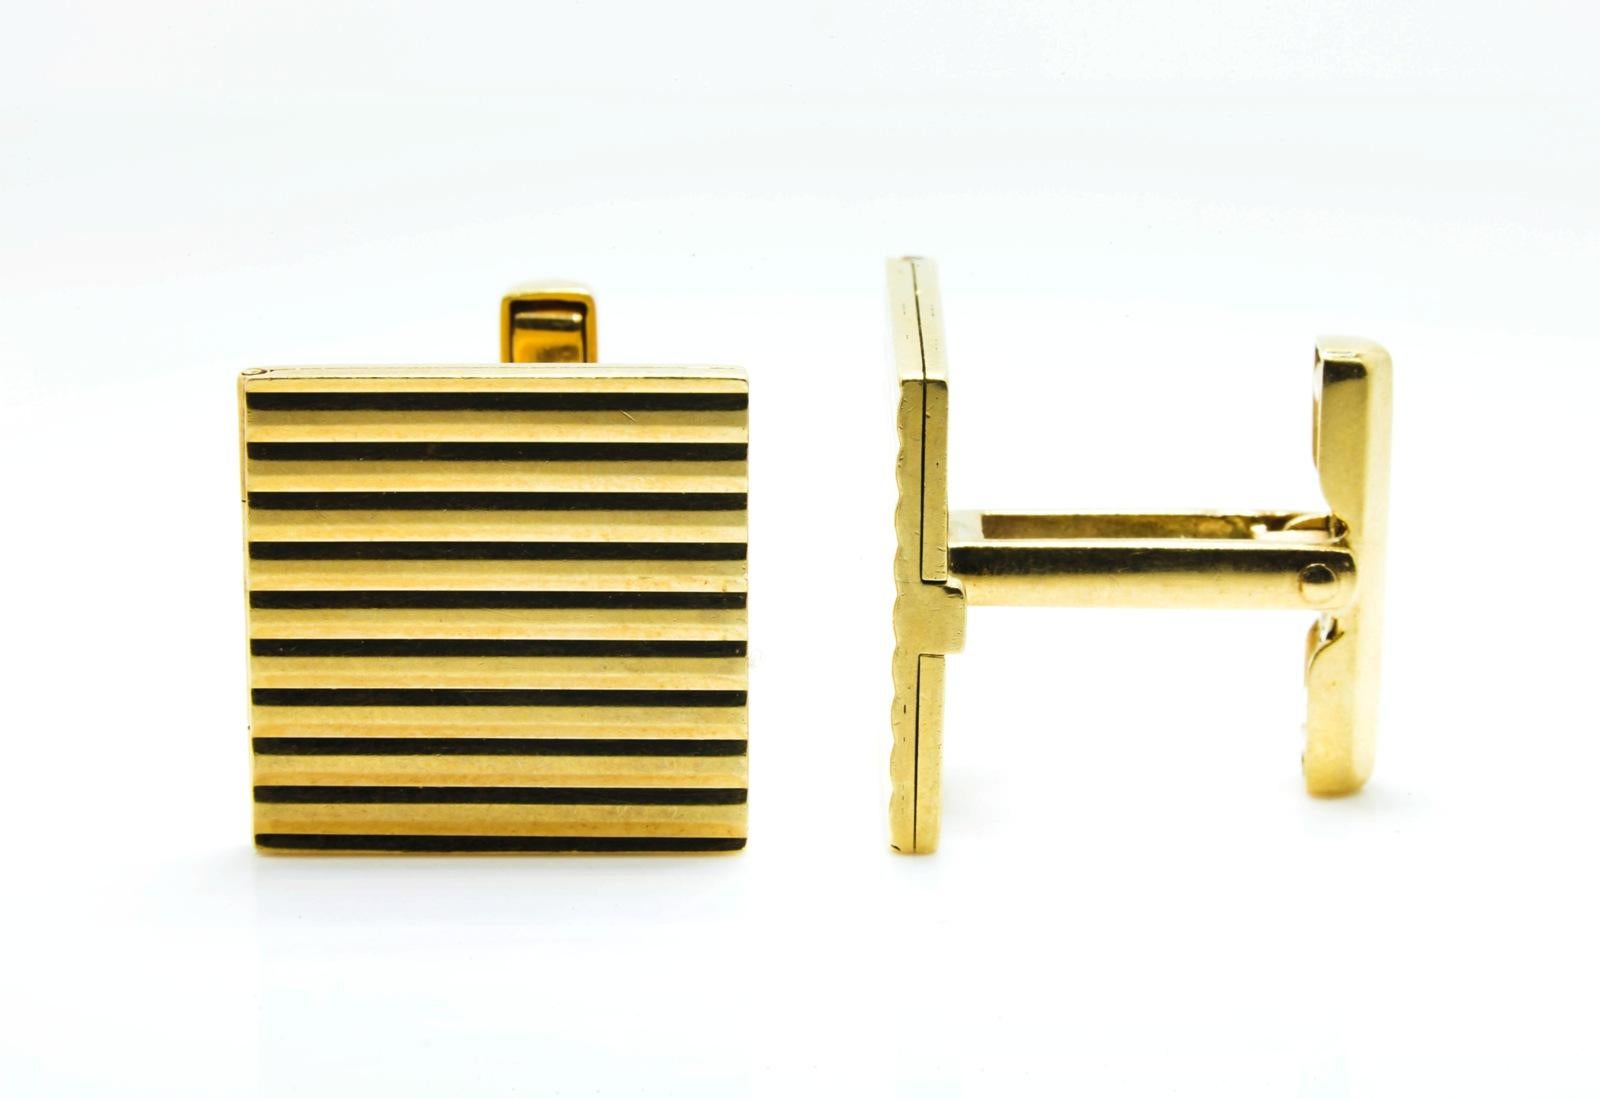 These are particularly unique 14KT yellow gold cufflinks as they also serve as a photo album.  The front of the 3/4 by 3/4 inches squares are enhanced with ridges, each cufflink open up to reveal space for two photos.  These are the original